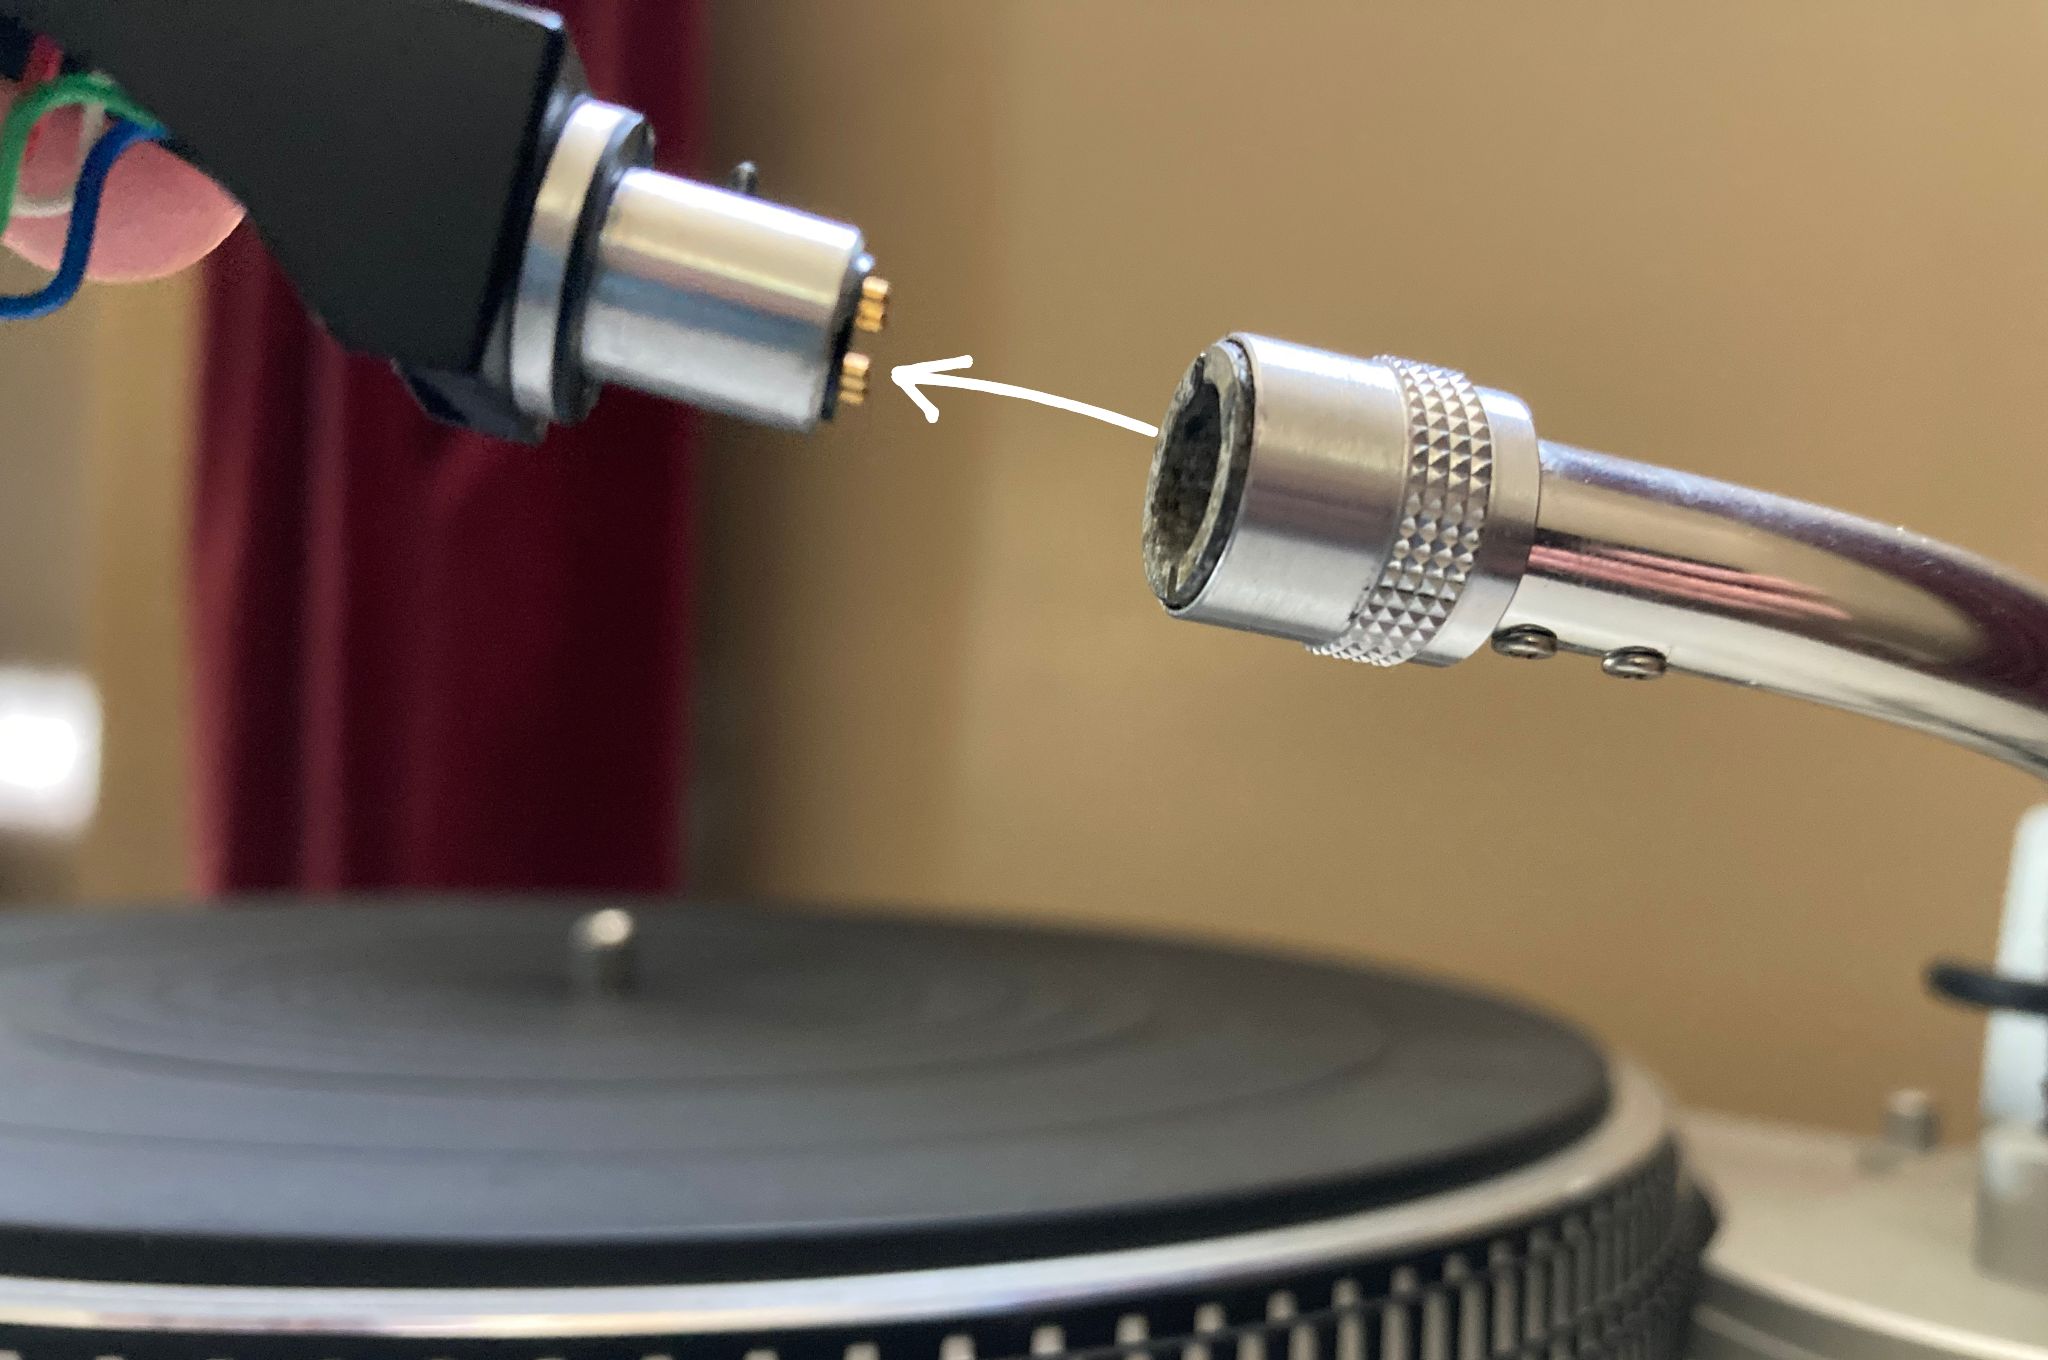 Disconnecting the headshell from the tonearm